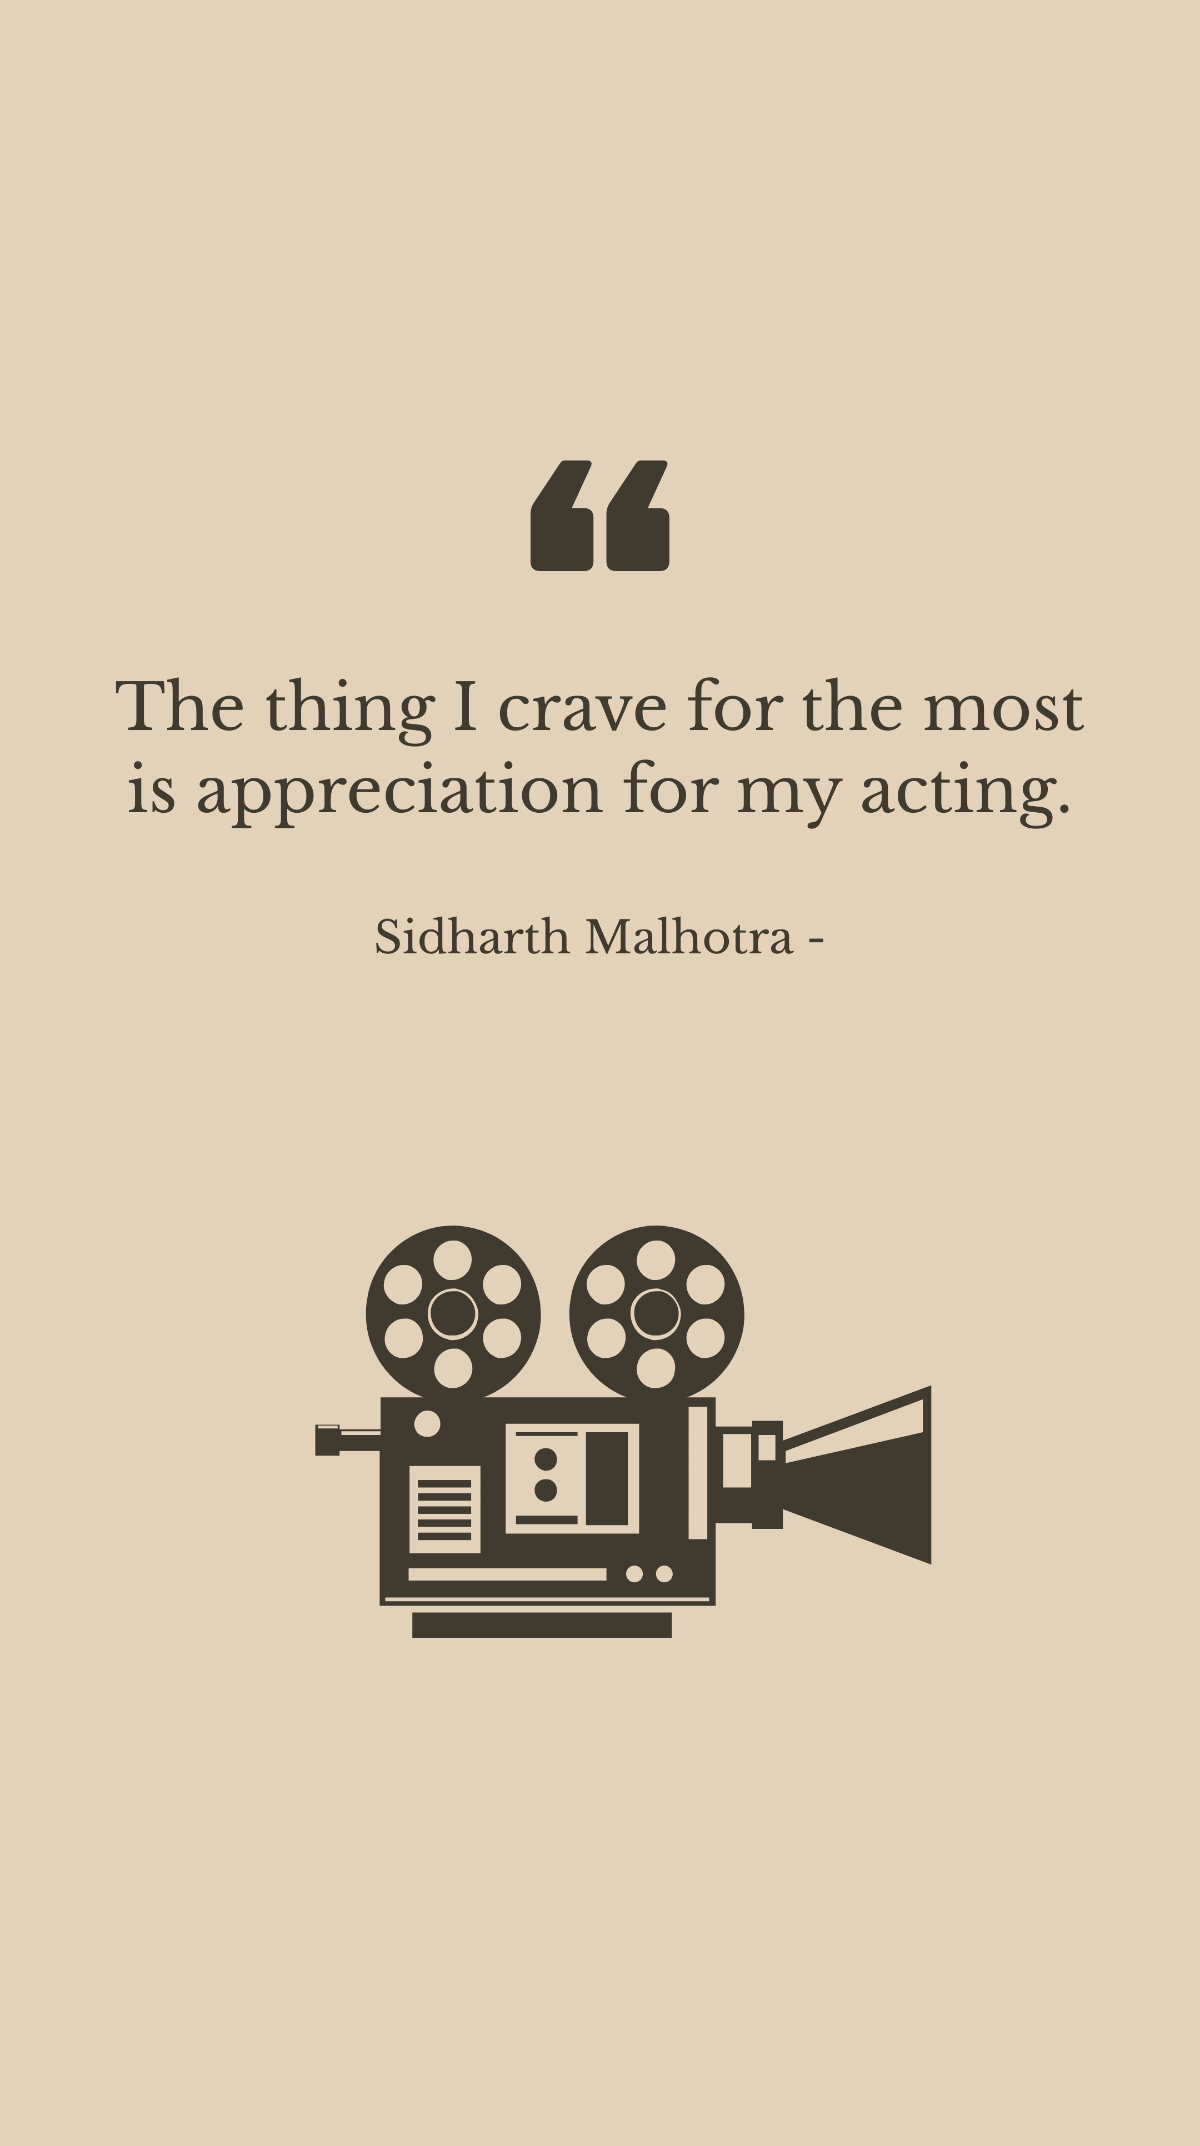 Free Sidharth Malhotra - The thing I crave for the most is appreciation for my acting. Template